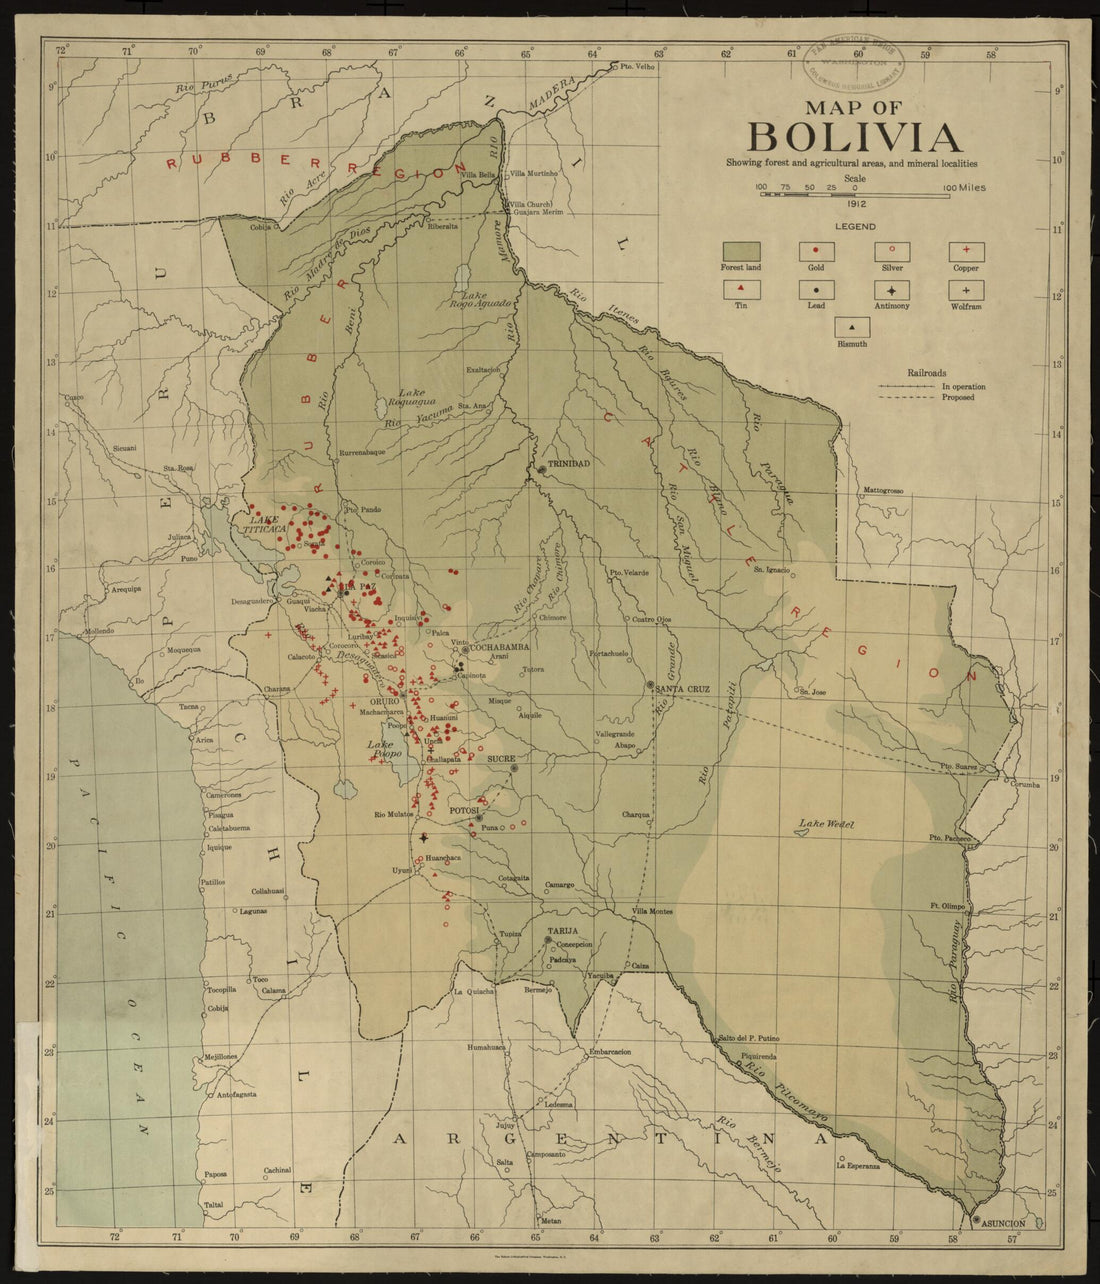 This old map of Map of Bolivia, Showing Forest and Agriculture Areas, and Mineral Localities from 1912 was created by  in 1912